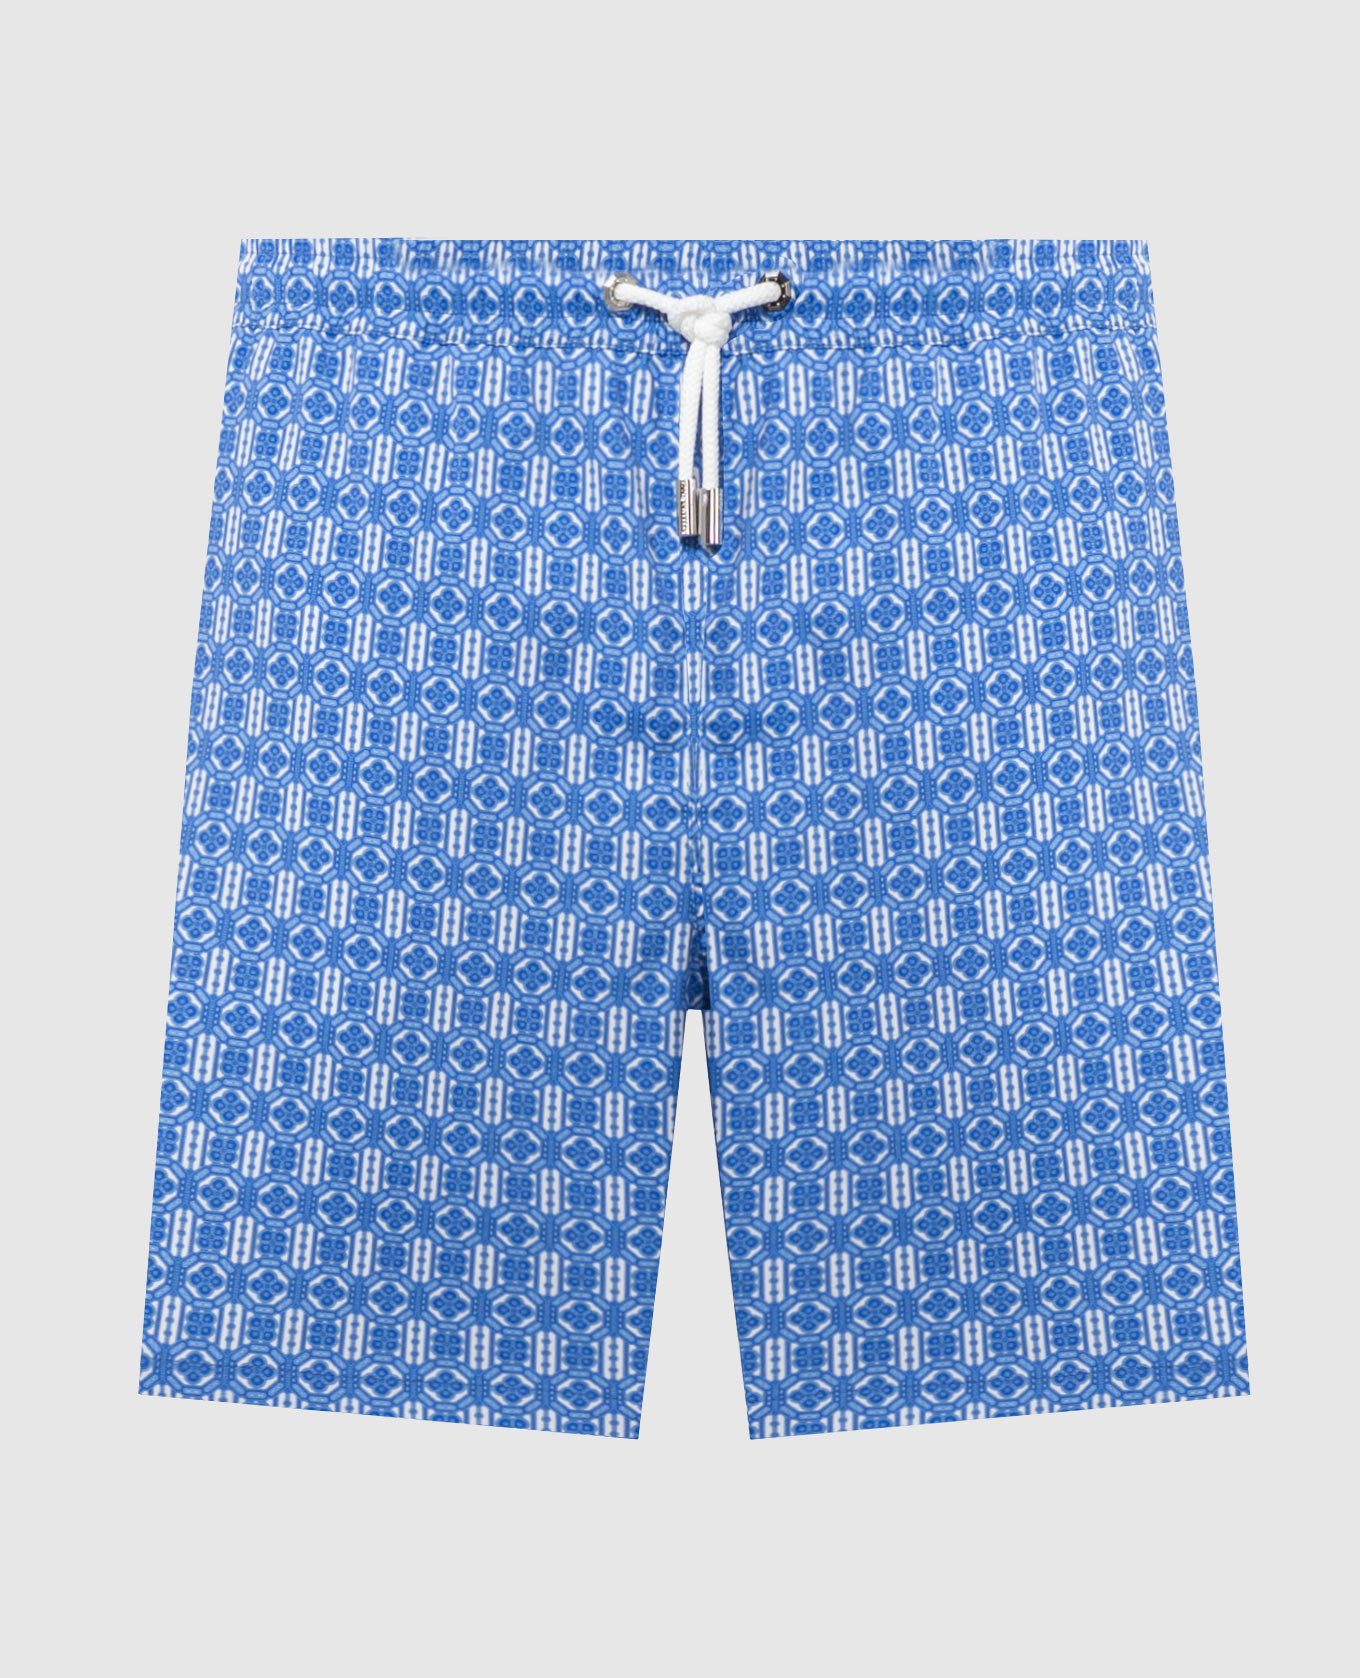 Blue patterned swimming shorts